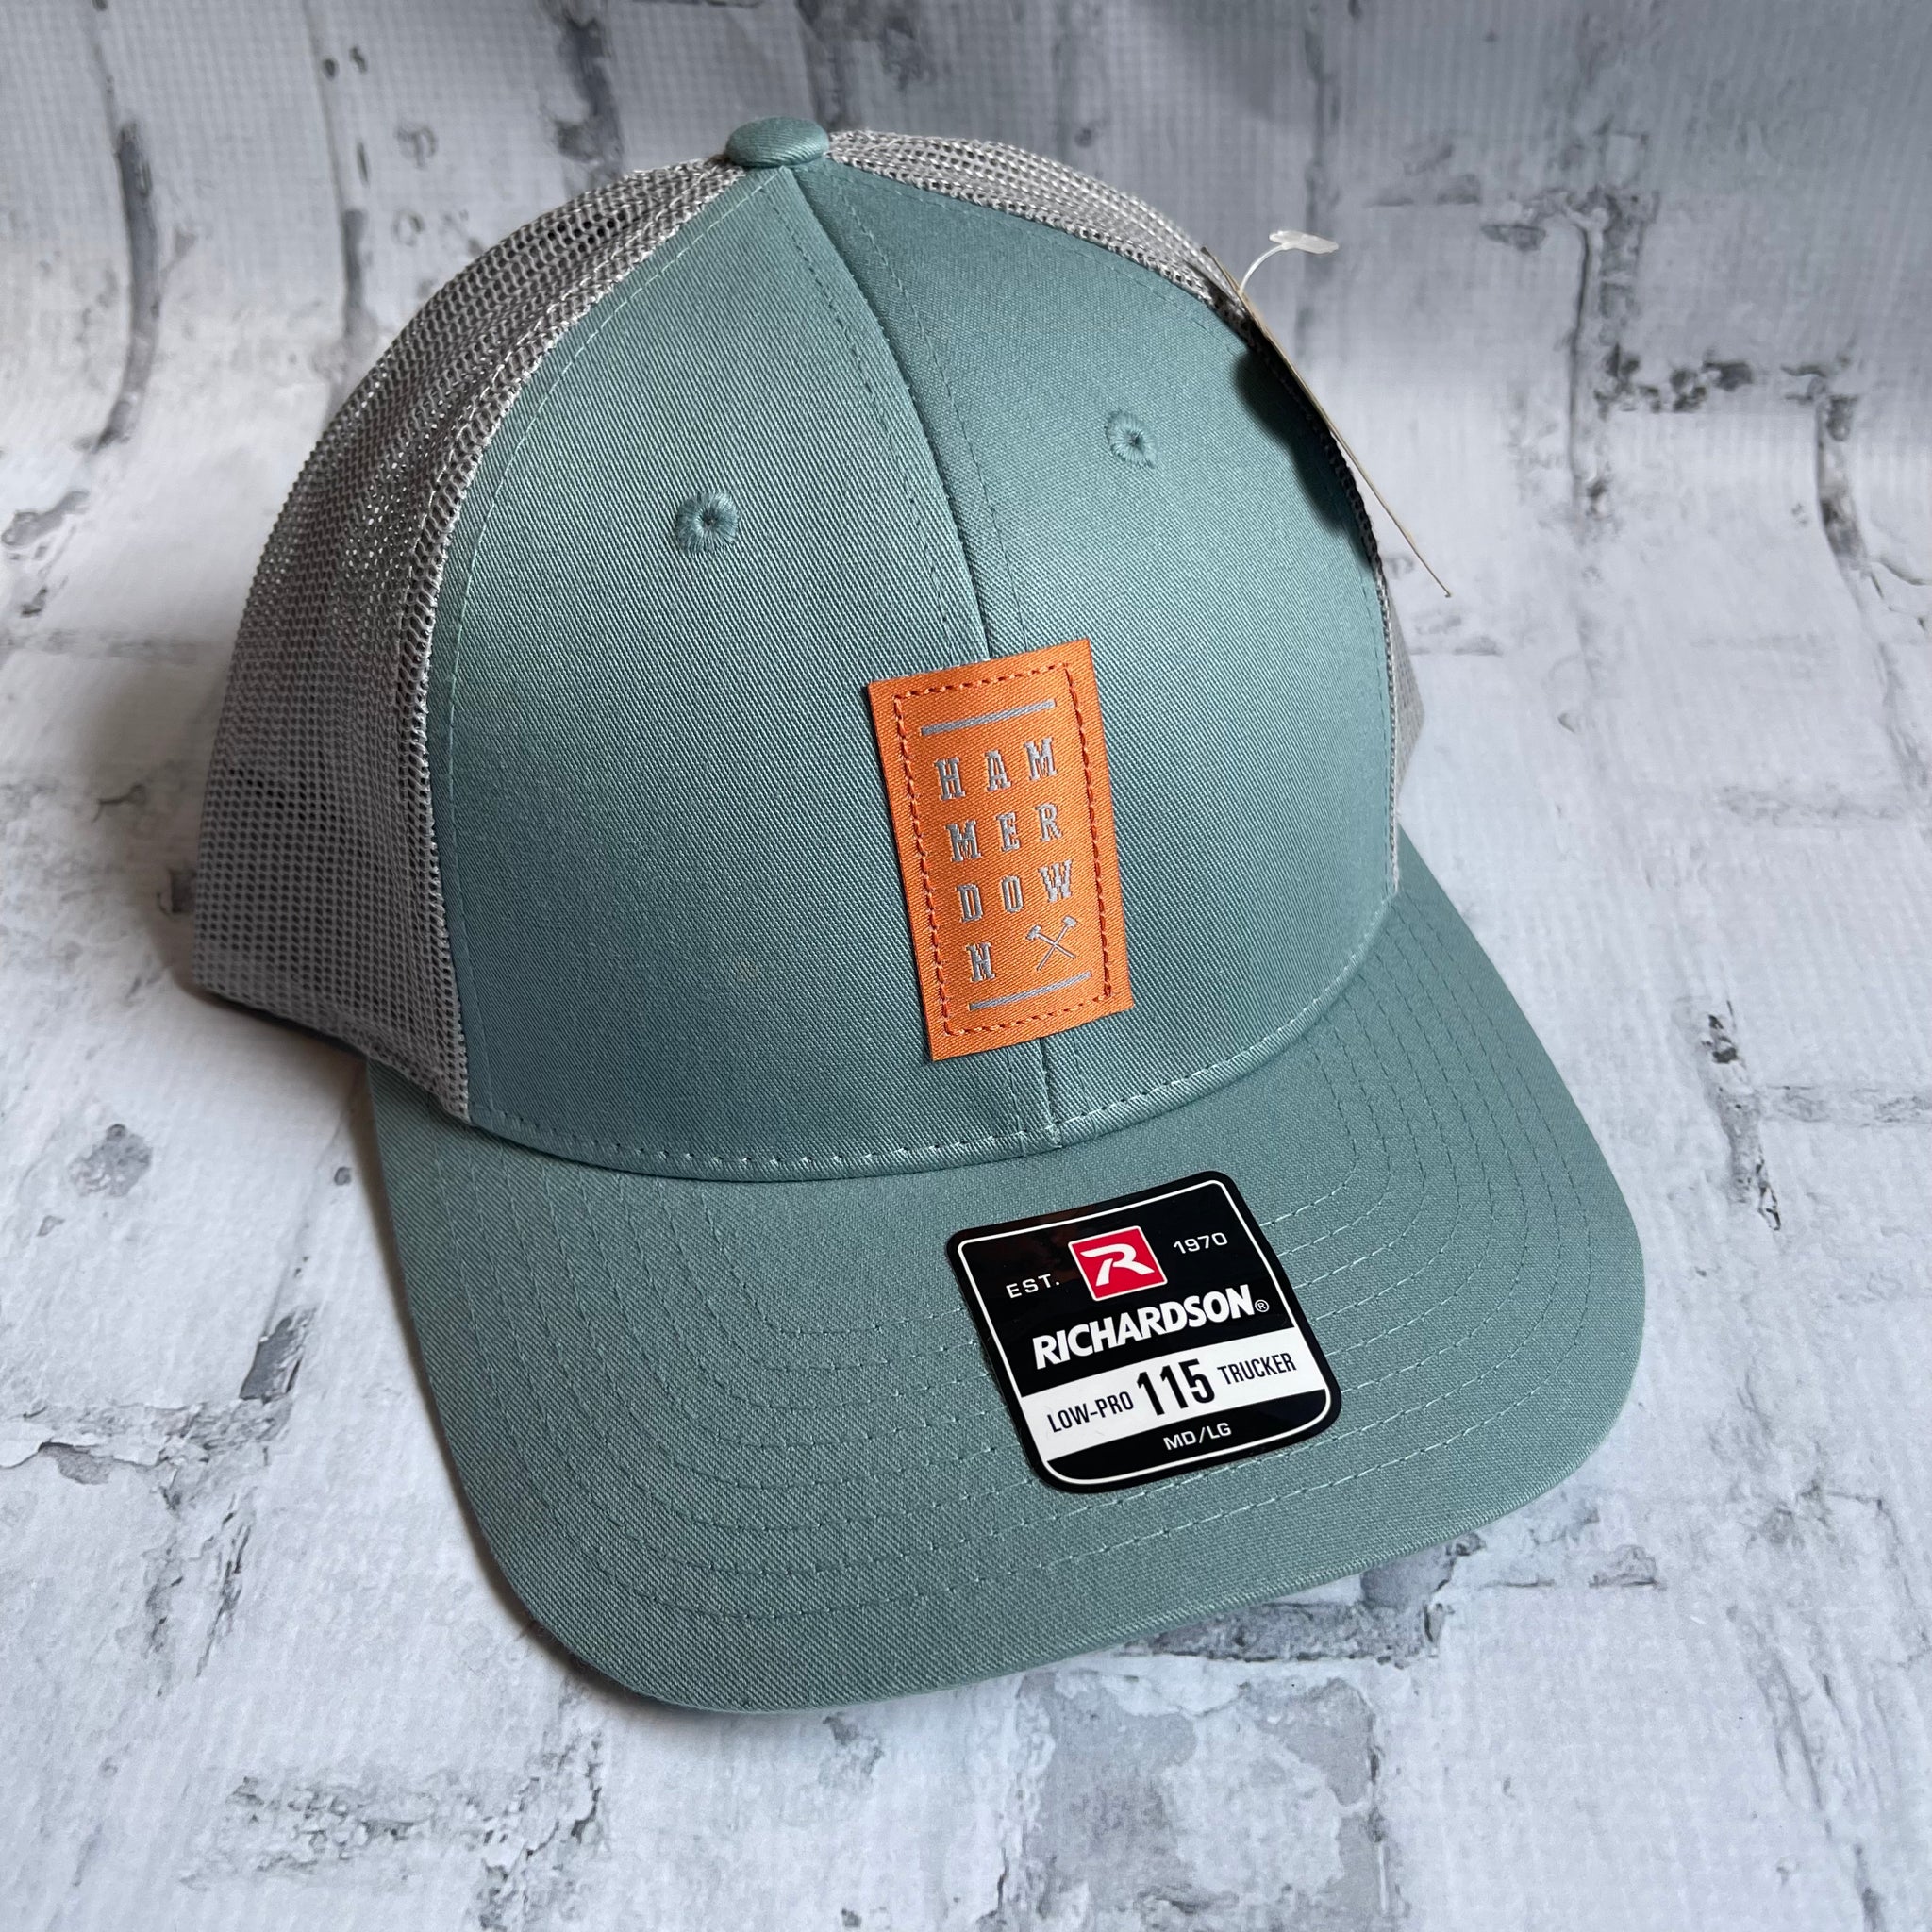 Hammer Down "Orange HD Stacker" Hat - Smoke Blue with Leather Patch - Southern Charm "Shop The Charm"